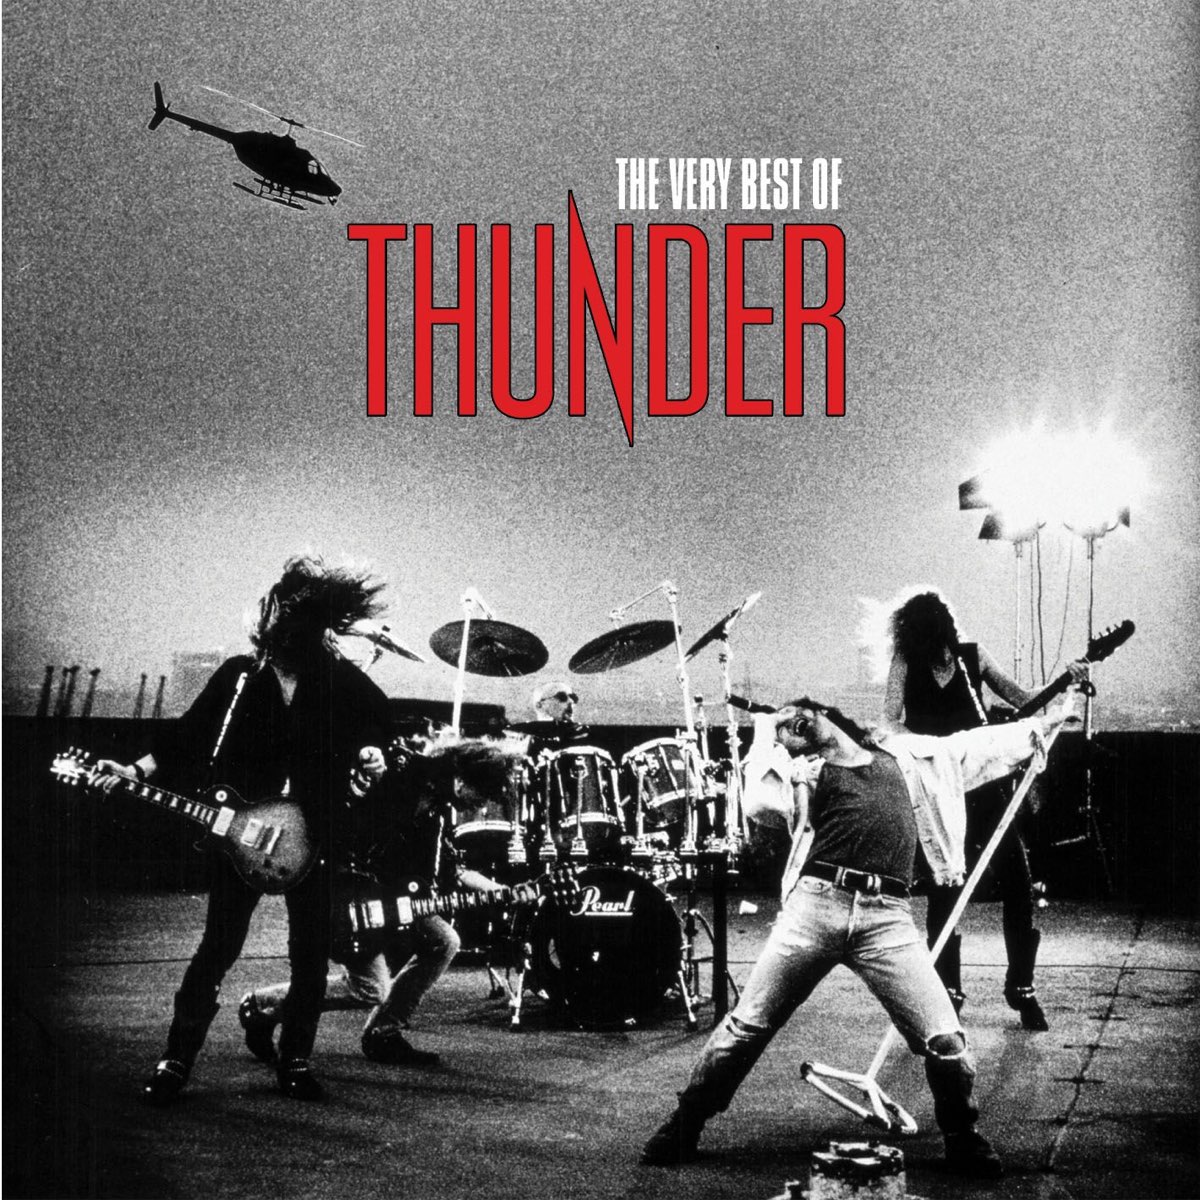 The Very Best of Thunder by Thunder on Apple Music